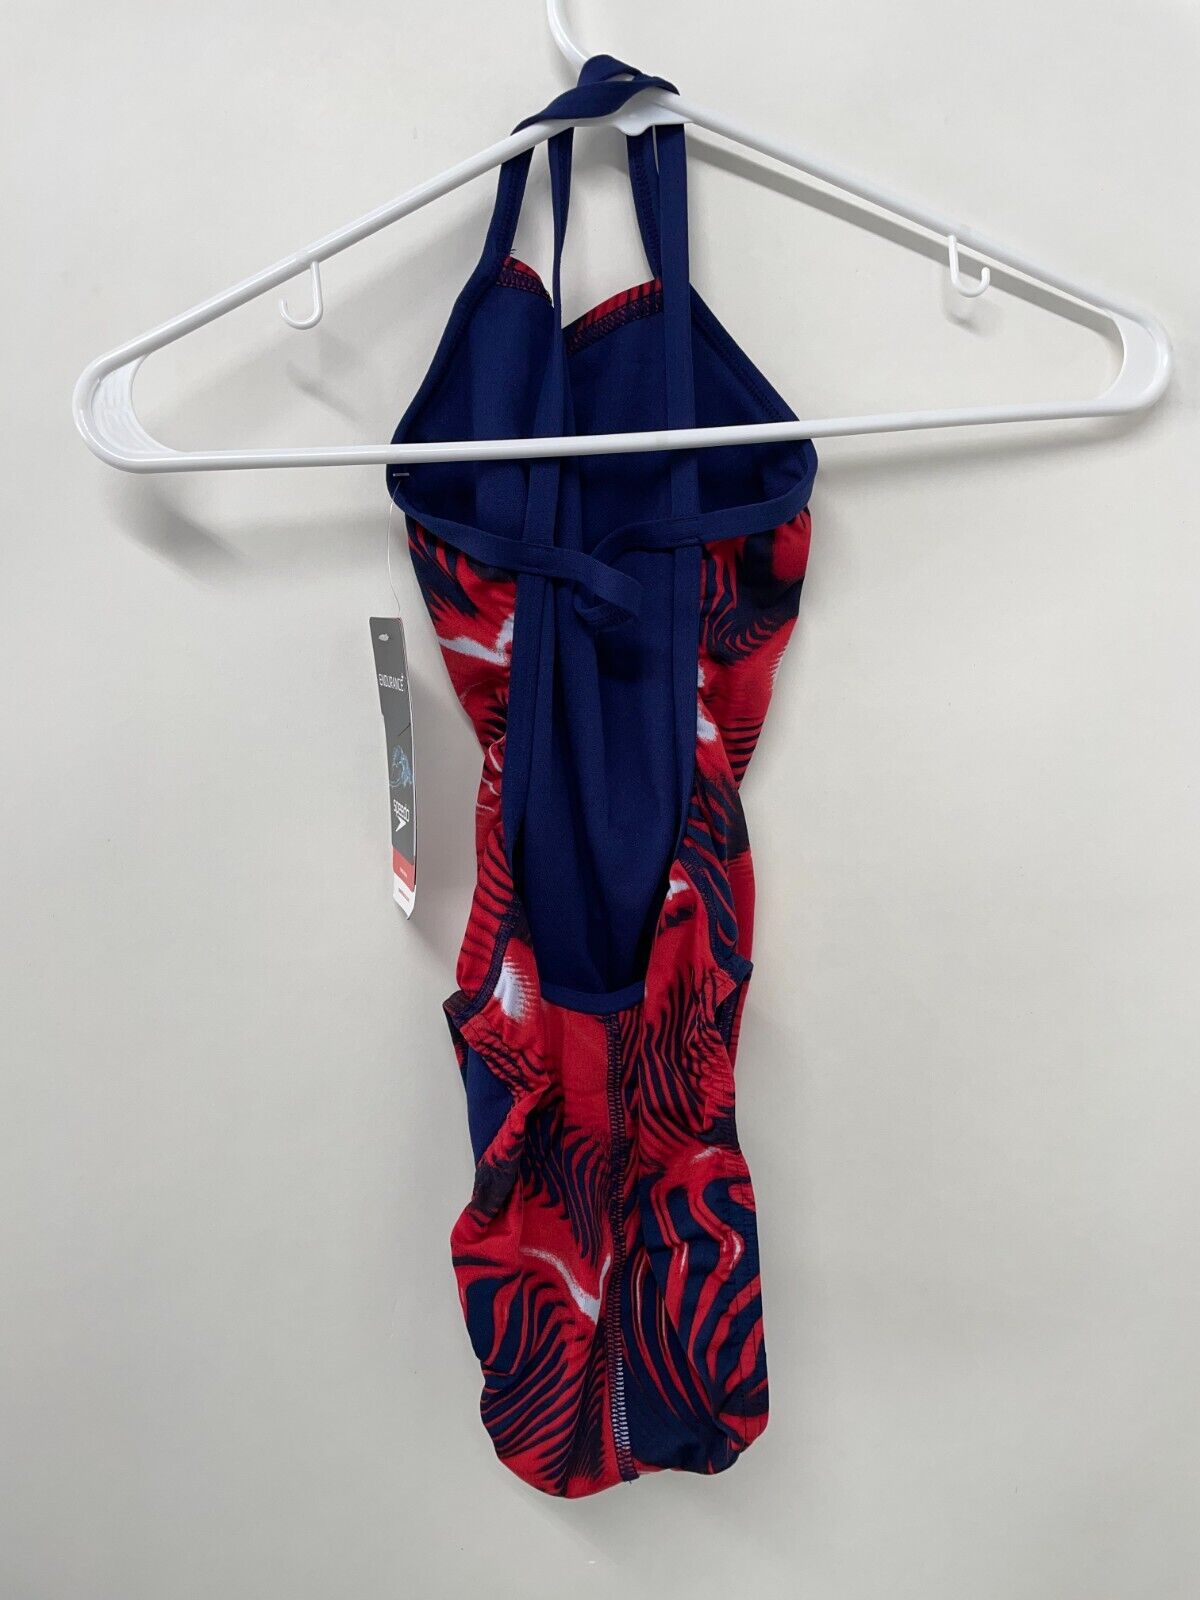 Speedo Womens 22 Pro LT Flyback One Piece Swimsuit Red White and Blue